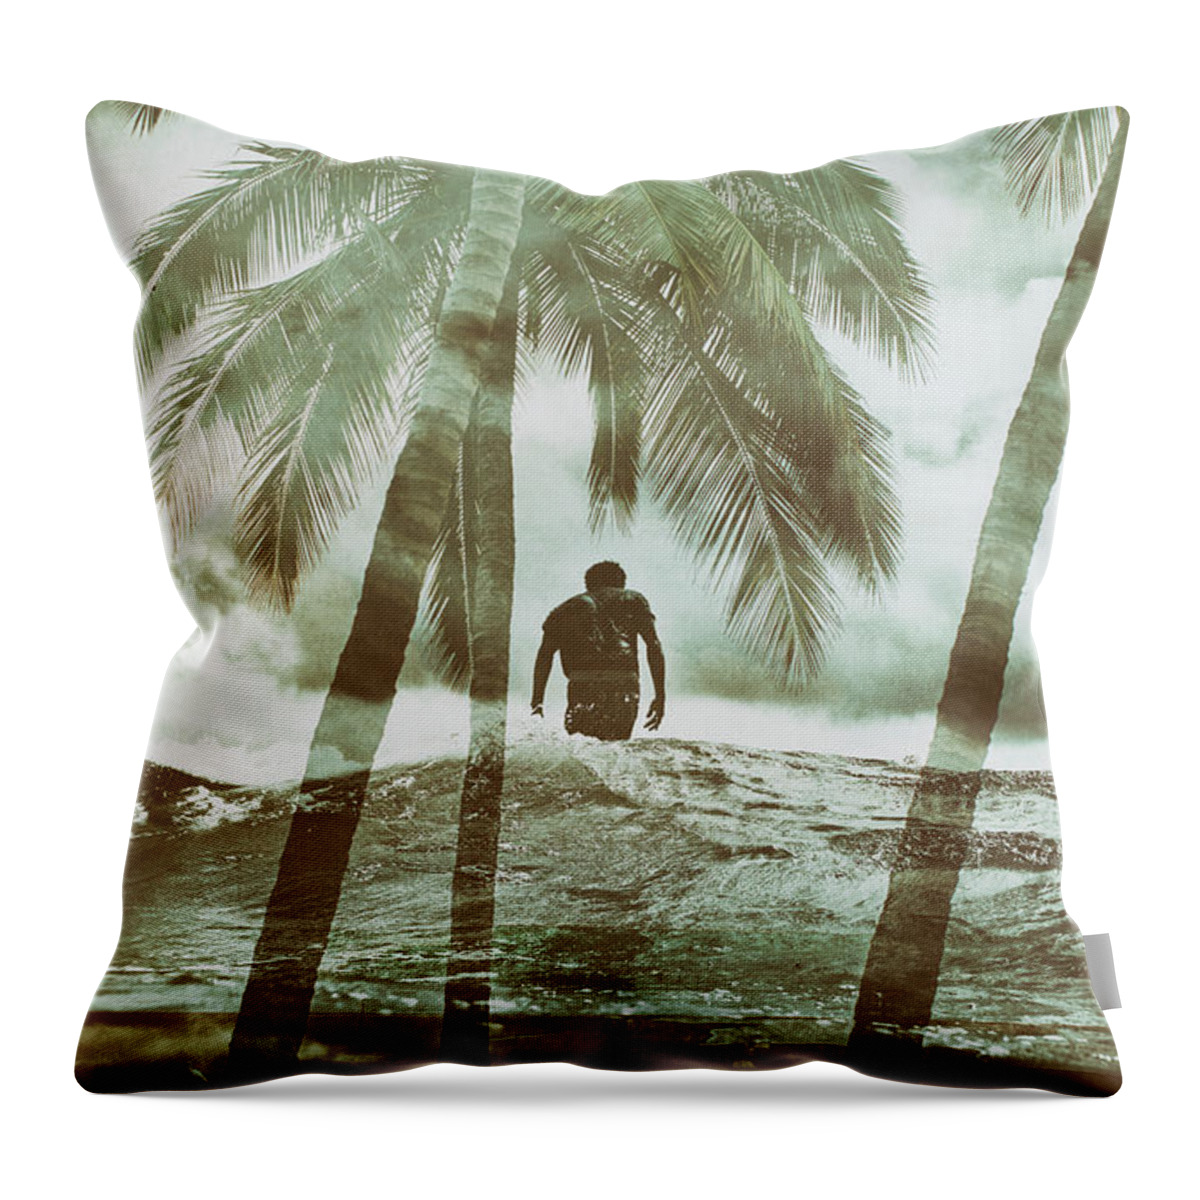 Surfing Throw Pillow featuring the photograph Izzy Jive And Palms by Nik West